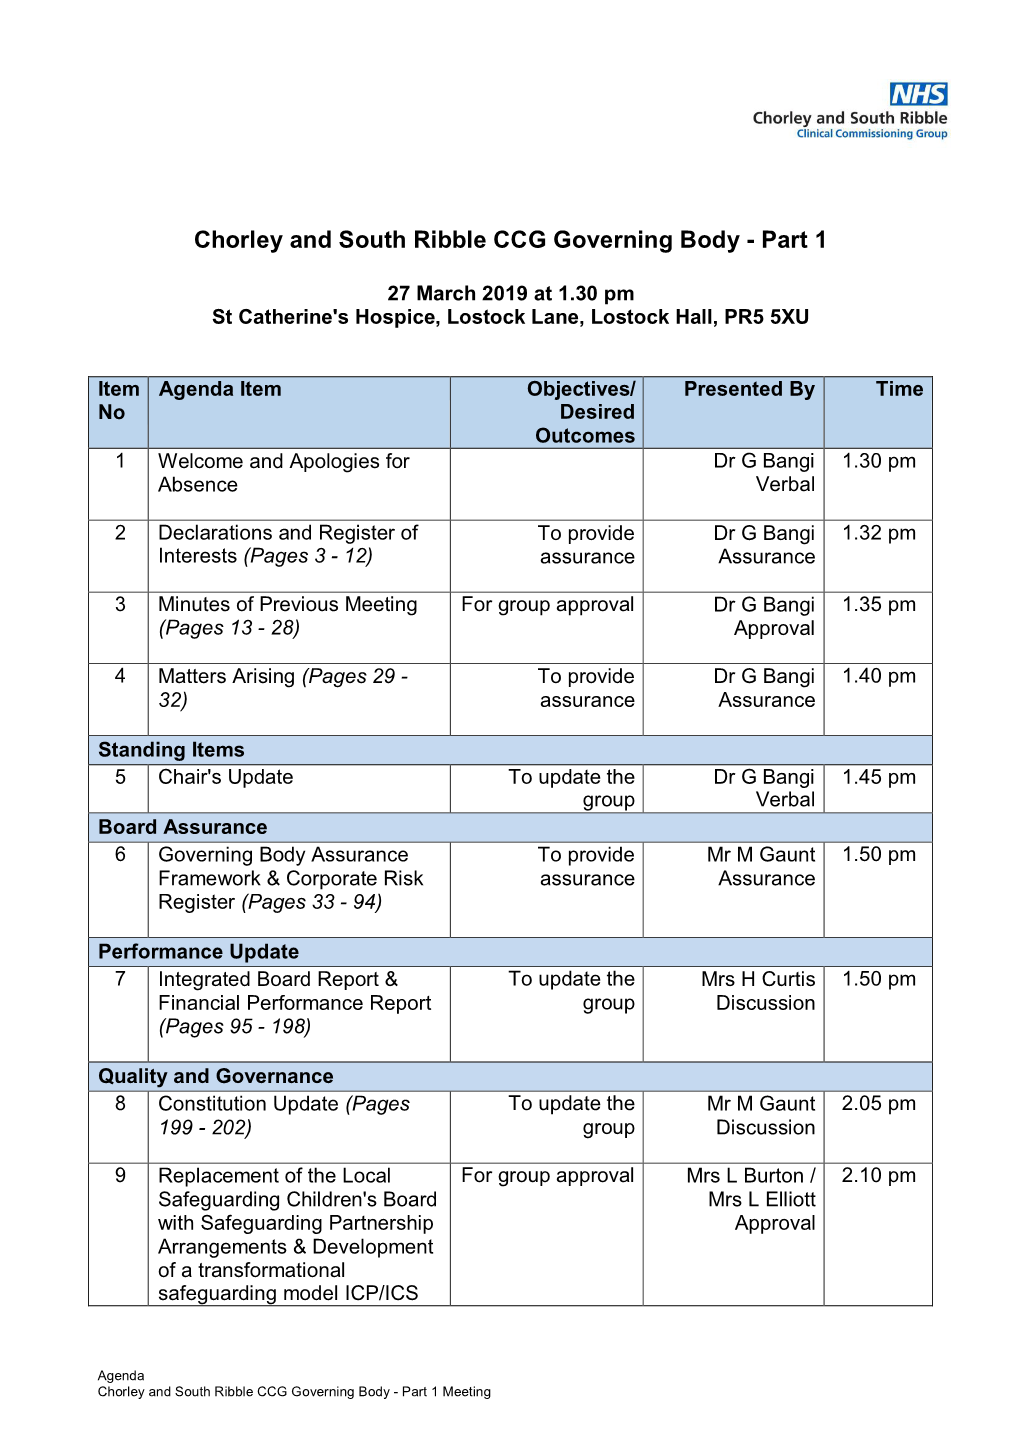 Agenda Document for Chorley and South Ribble CCG Governing Body